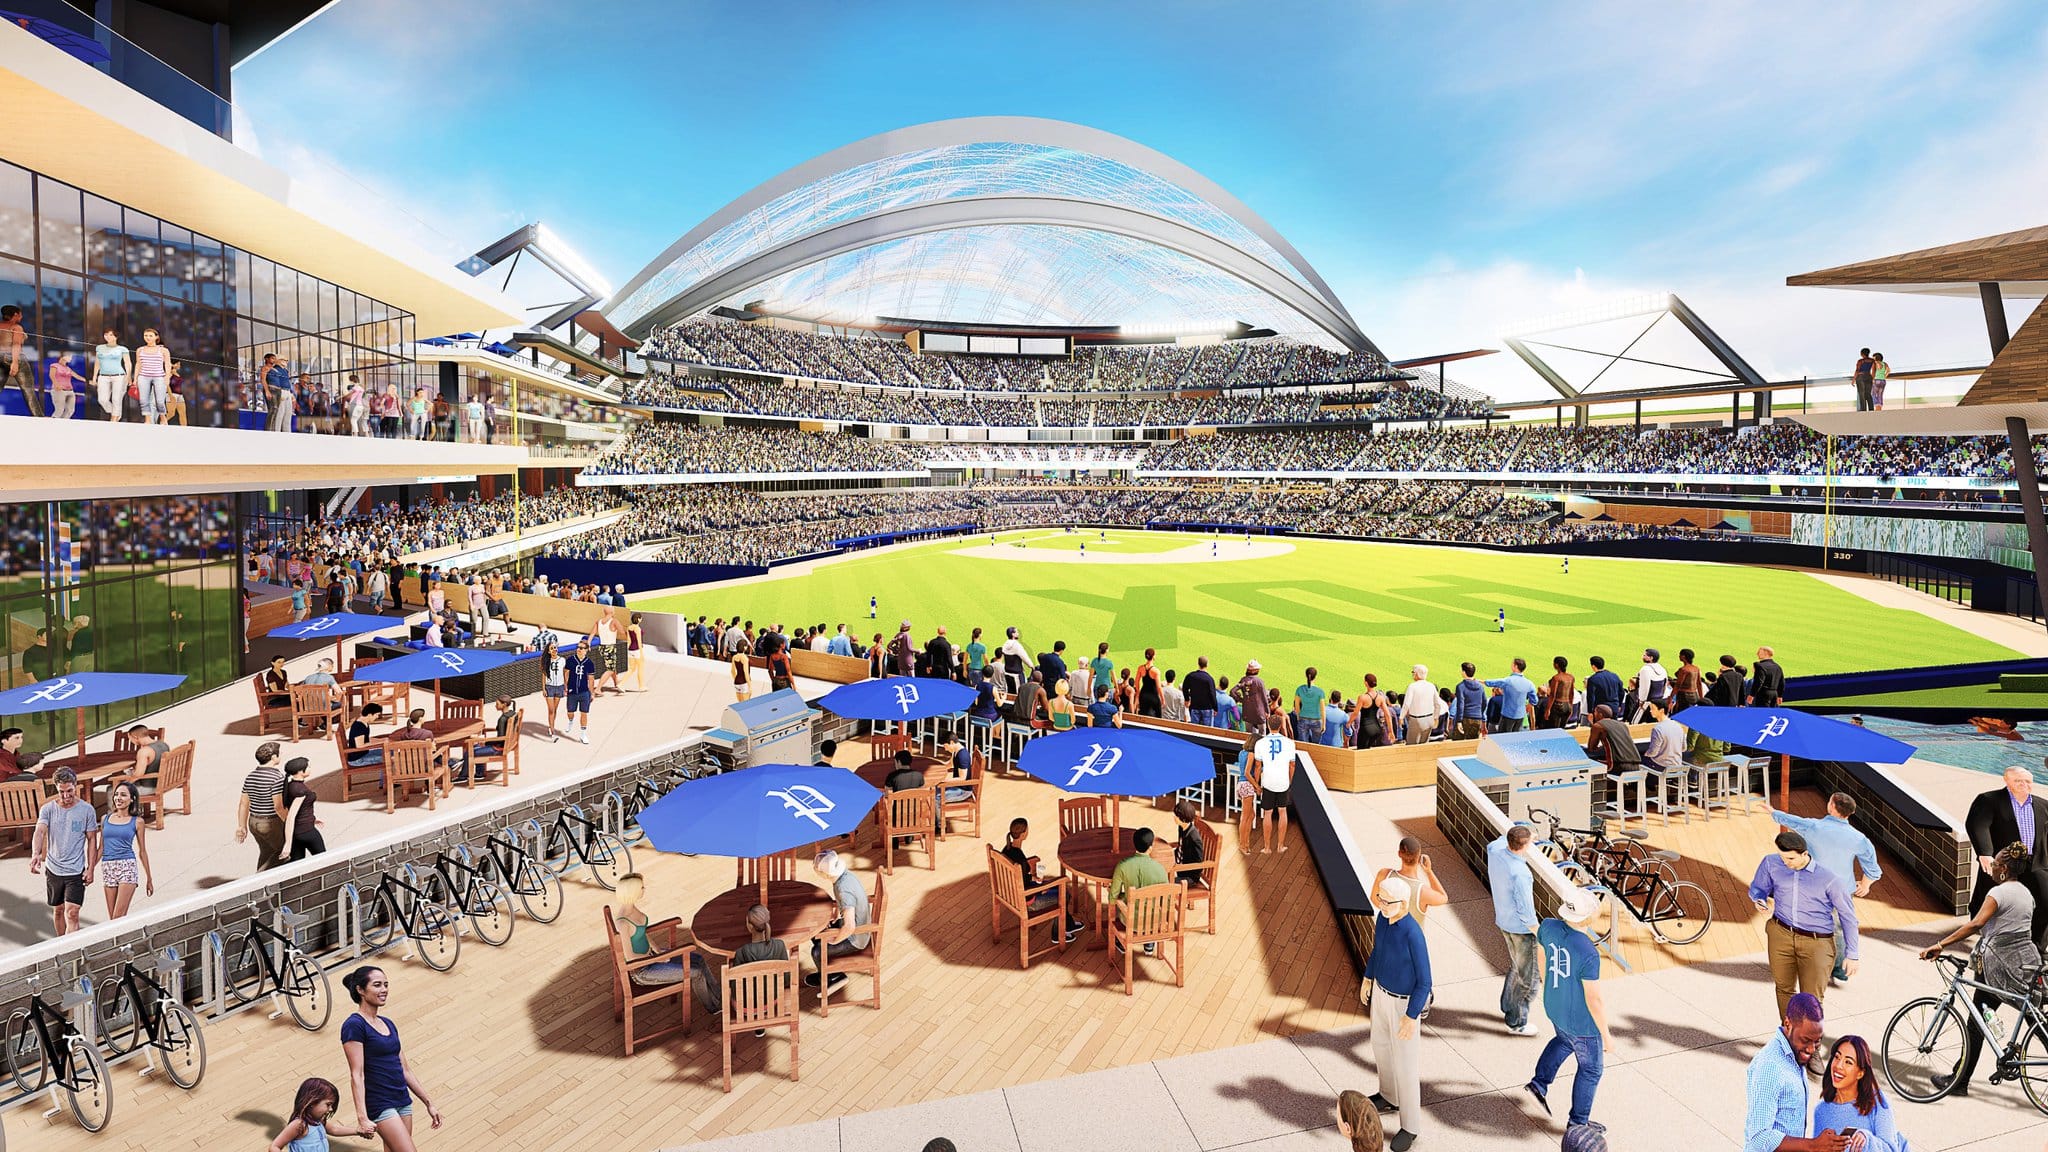 A group seeking to lure a Major League Baseball team to Portland announced that it has signed an agreement in principle to develop a 45-acre waterfront site. The agreement with the Port of Portland was announced Thursday by the Portland Diamond Project. The group also released artist renderings of a new ballpark at the port's Terminal 2.